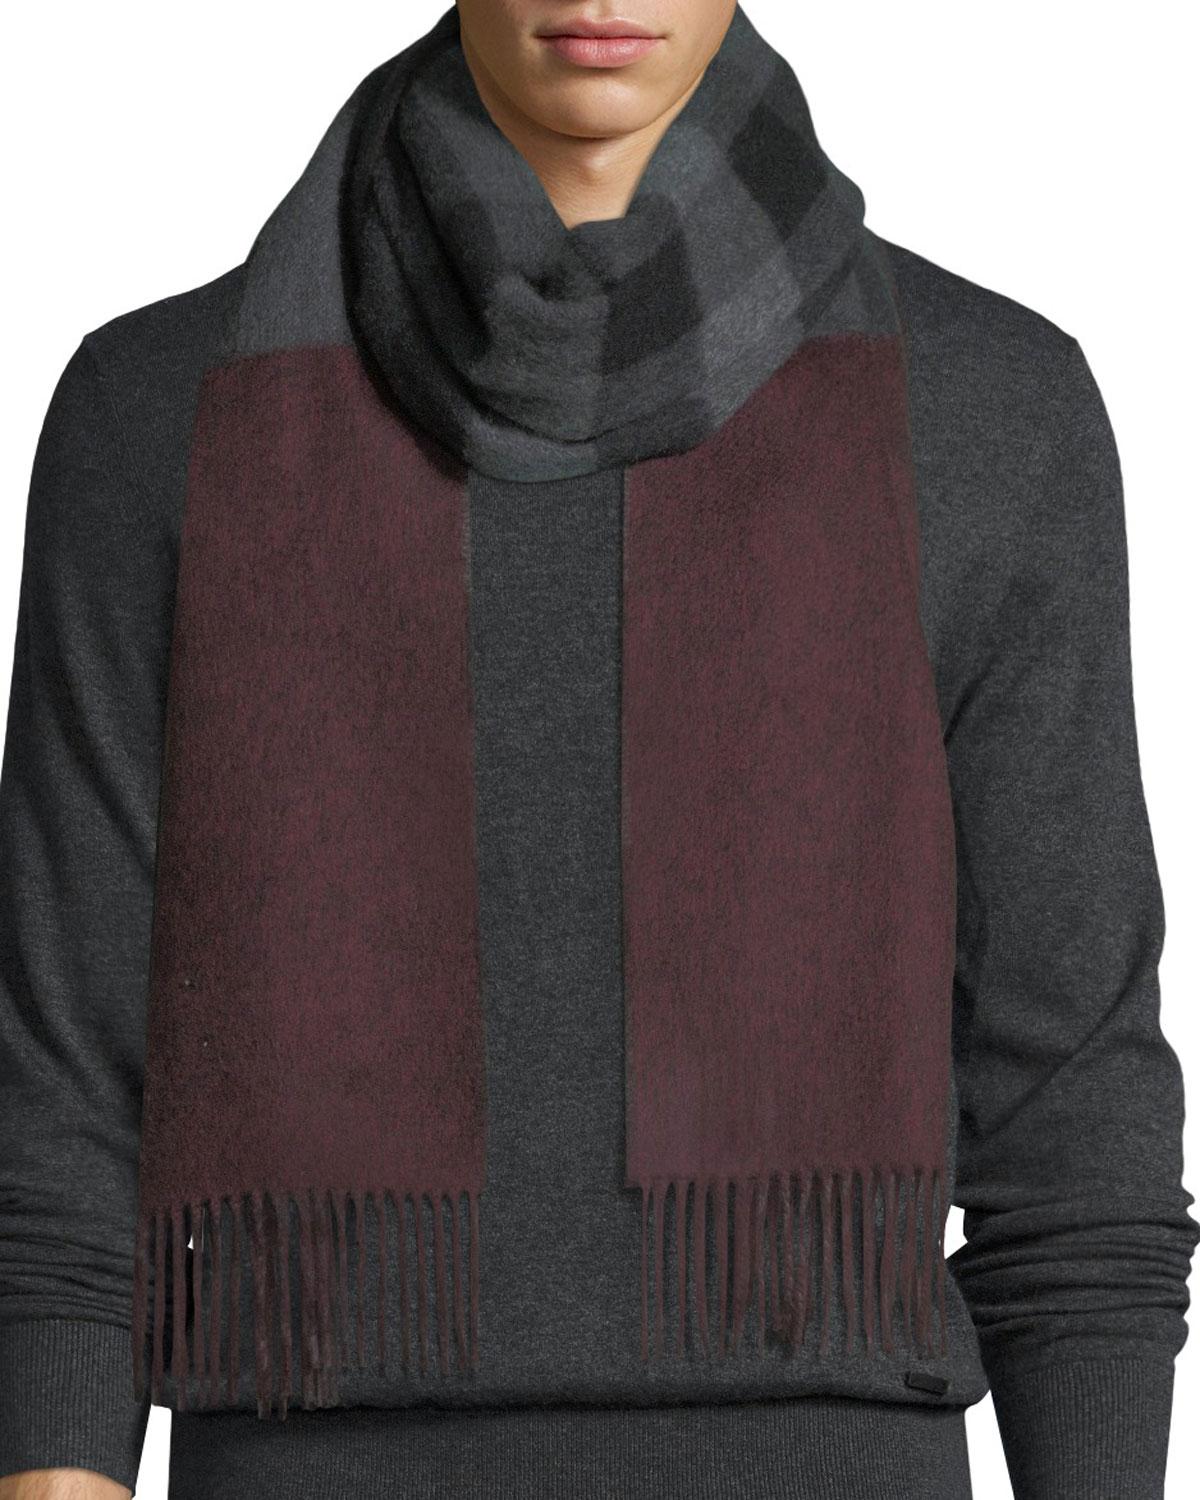 Burberry Reversible Mega Check Cashmere Scarf in Gray for Men - Lyst